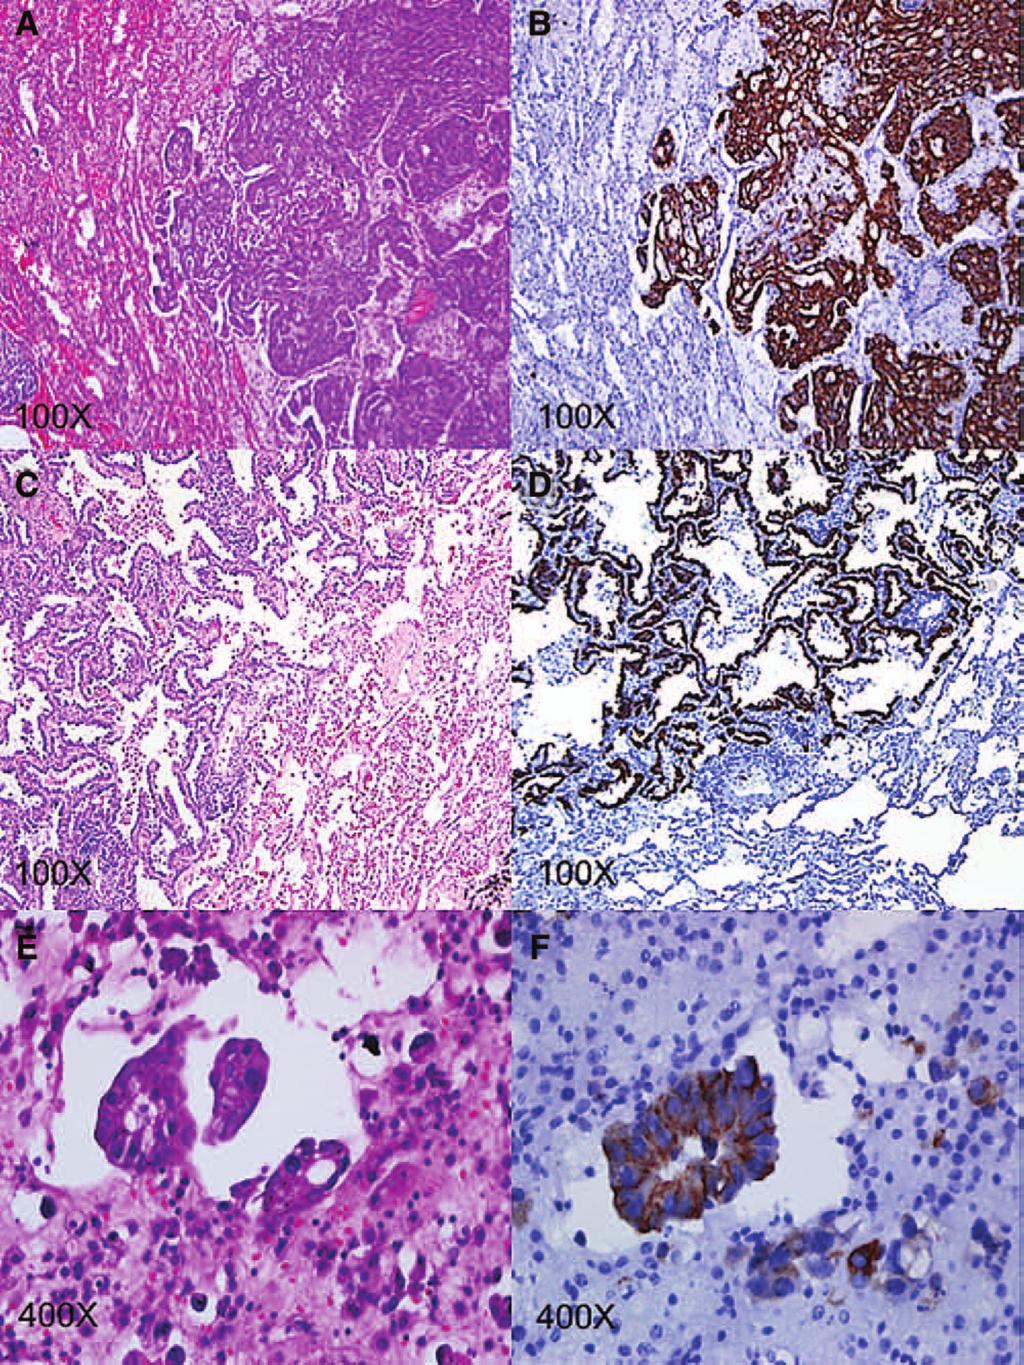 Journal of Thoracic Oncology Volume 9, Number 8, August 2014 Lung Adenocarcinoma Patients with ROS1 Fusion FIGURE 1.